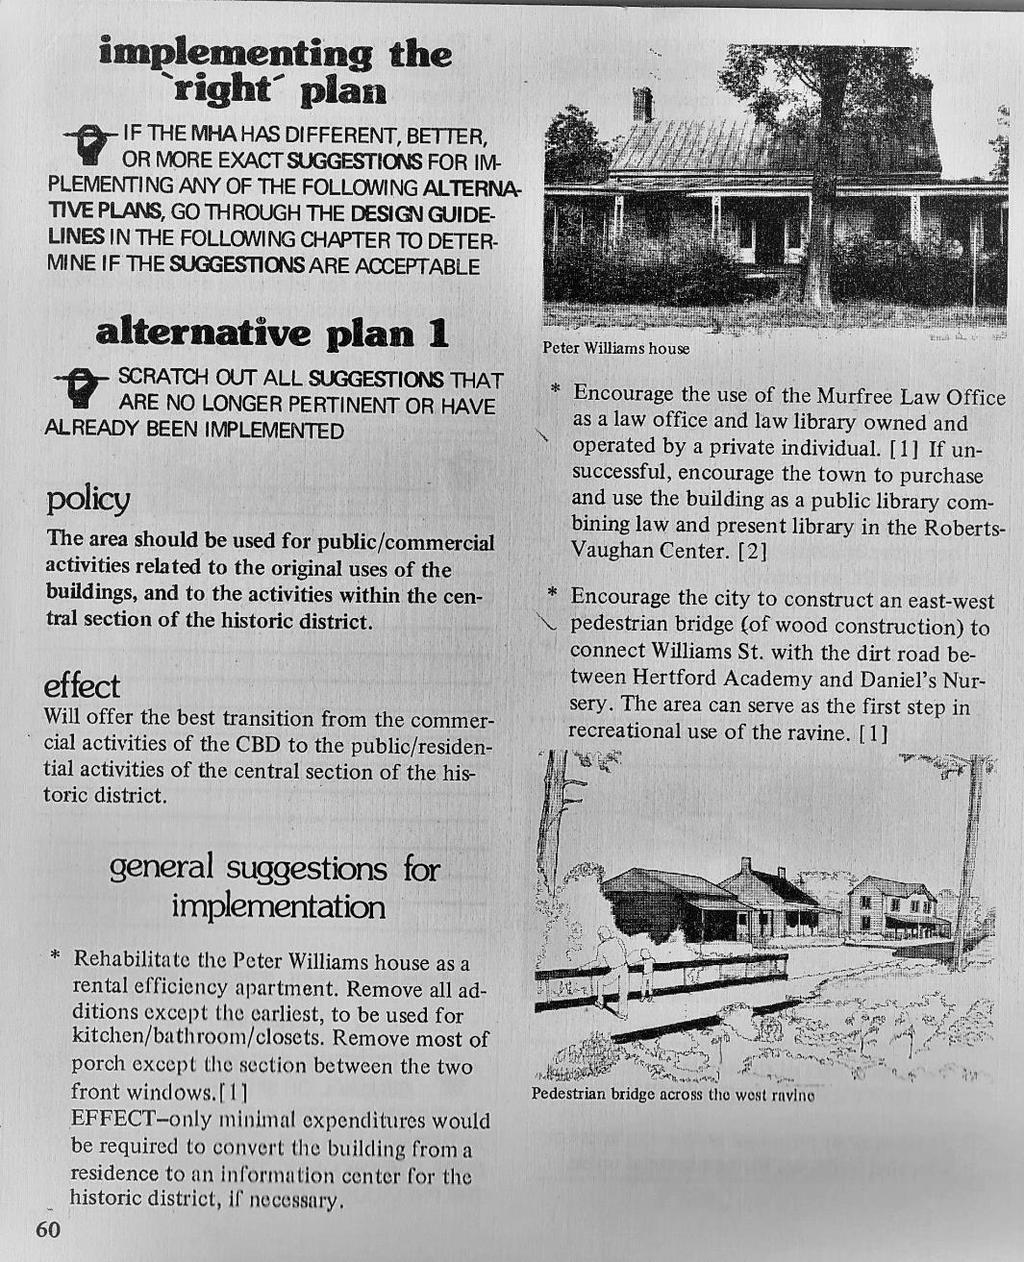 The First Plan Compiled by the Community Development Group, School of Design at North Carolina State University in the mid 1970s Called for the house to be rehabilitated